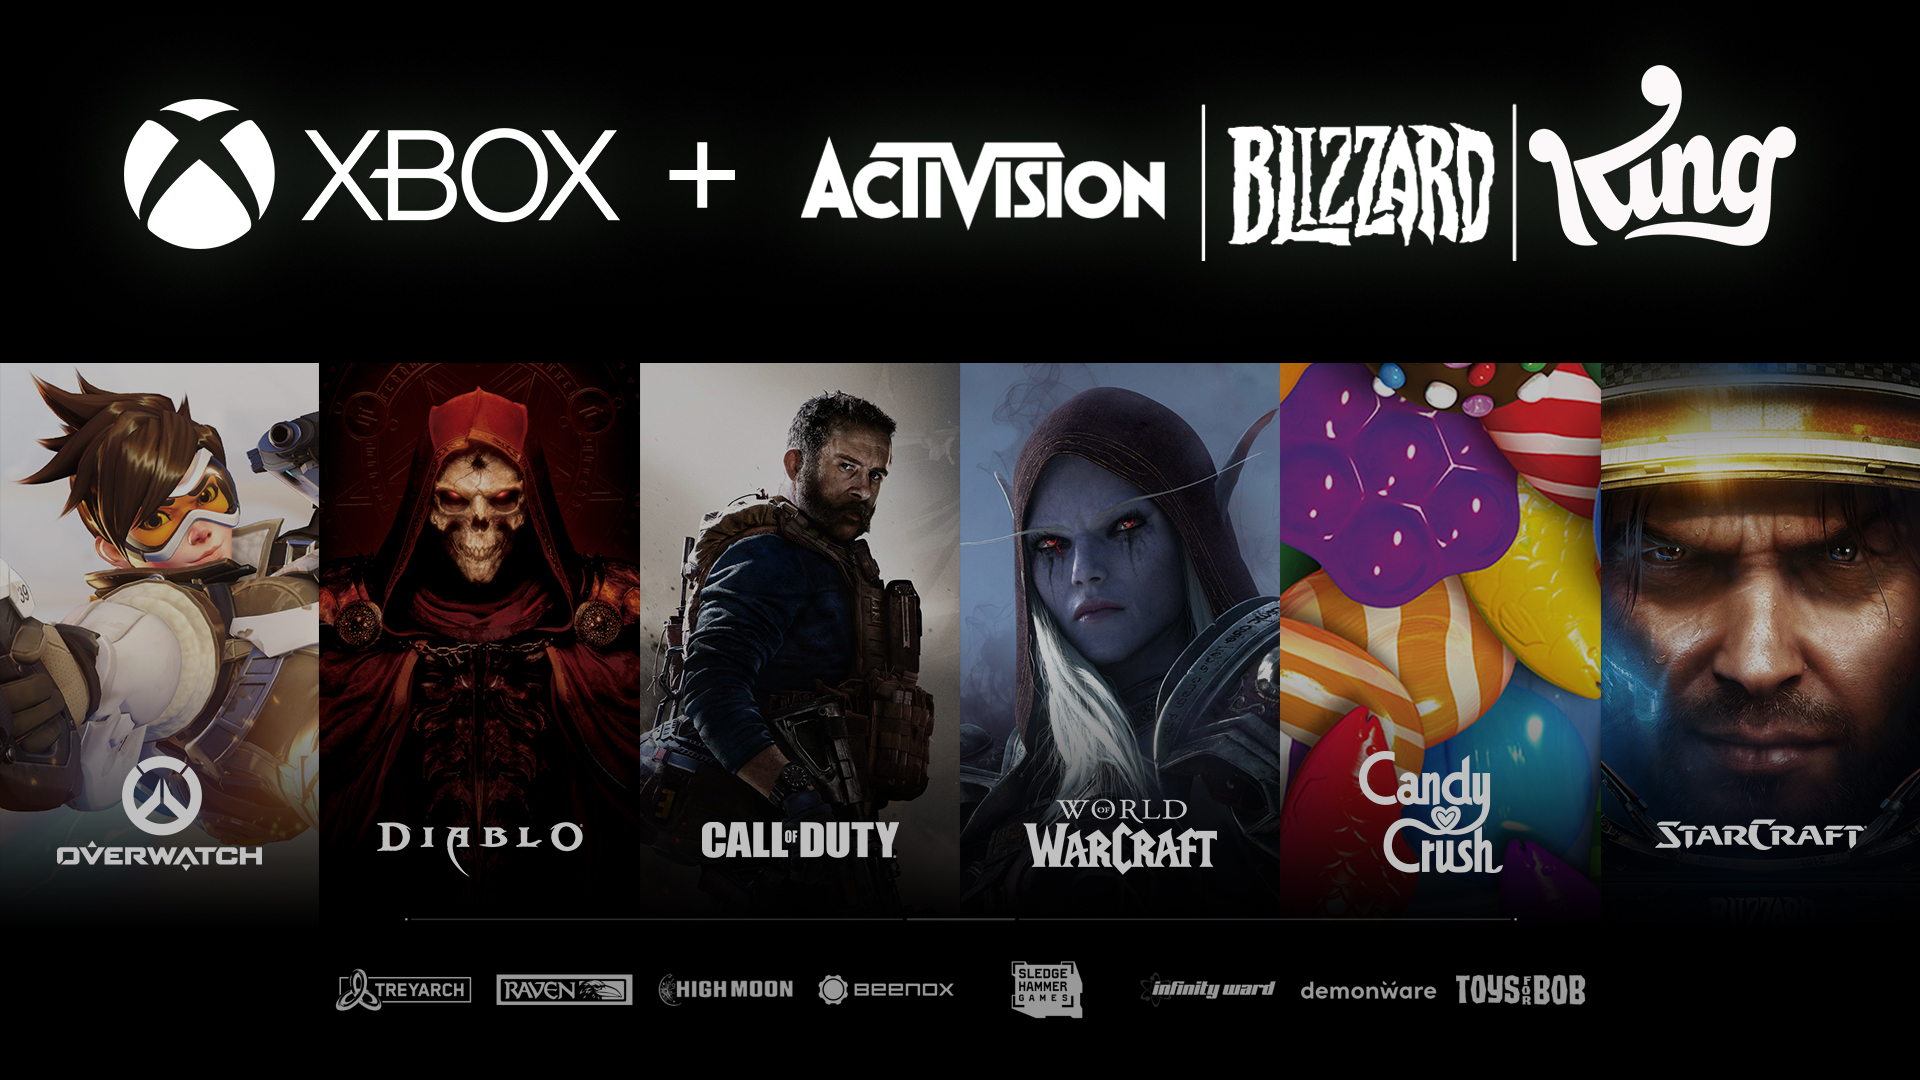 Biggest Acquisition Ever In The Gaming World History, As Microsoft Approaches An Acquisition Of Activision Blizzard